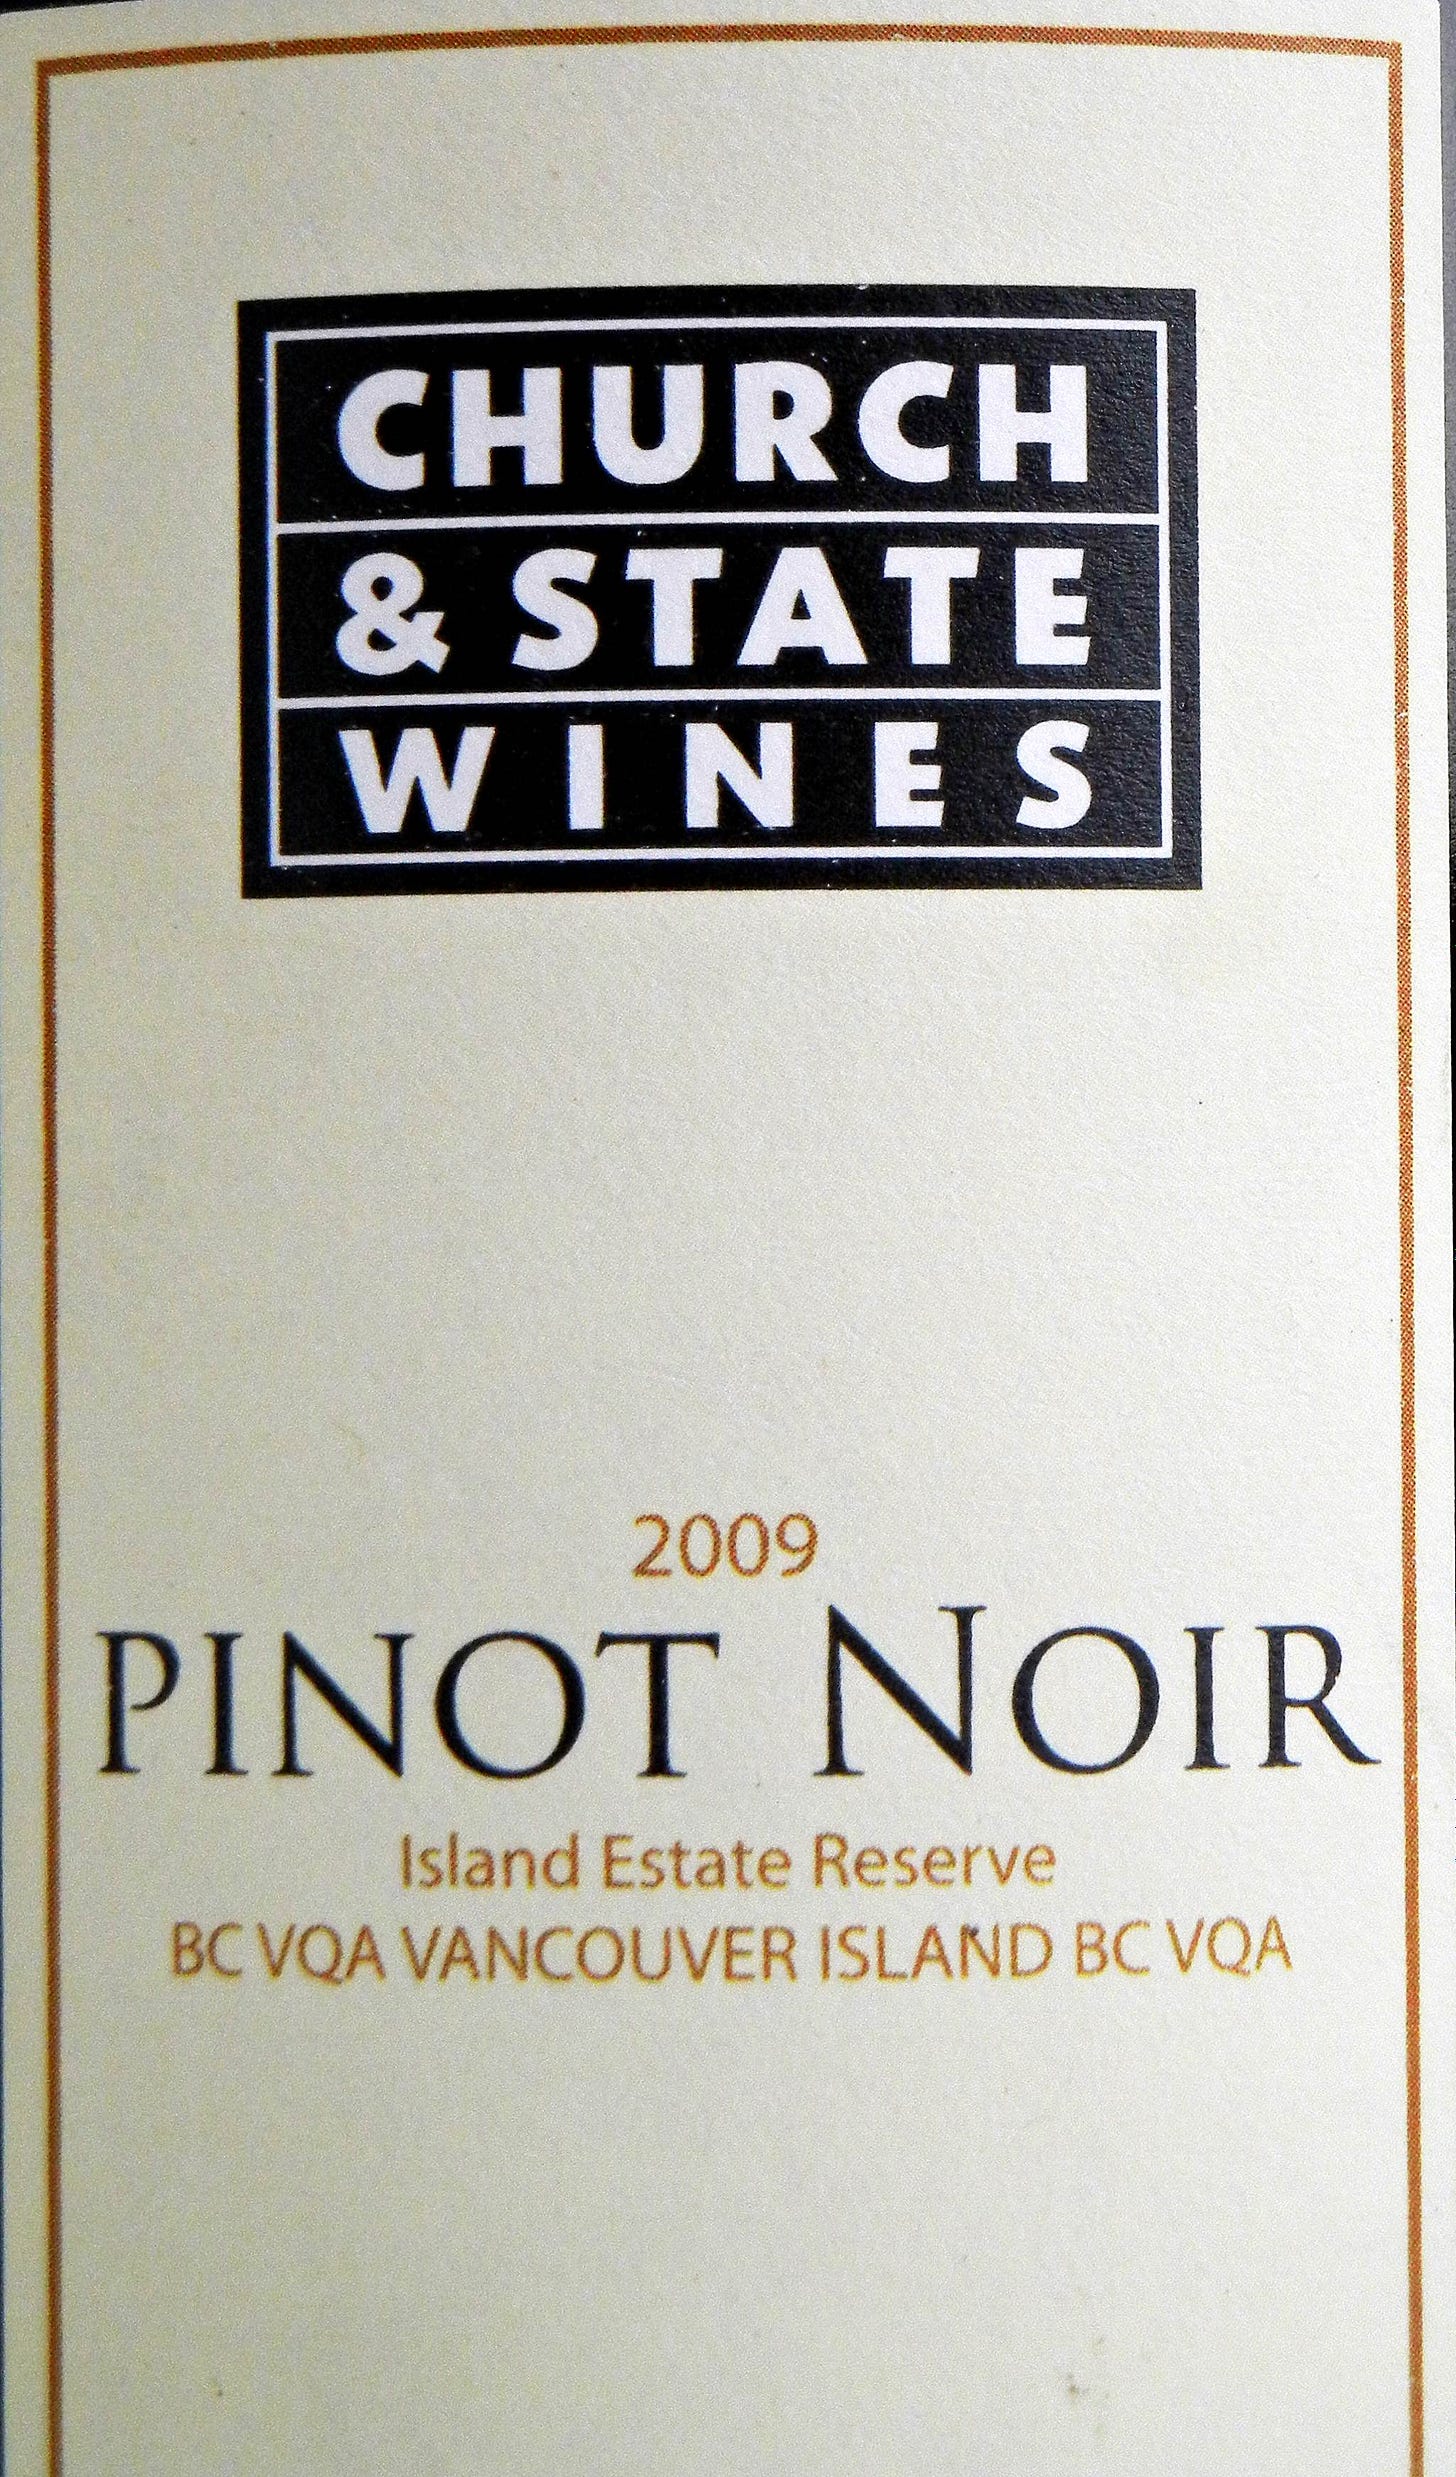 Church & State Island Estate Reserve Pinot Noir 2009 Label - BC Pinot Noir Tasting Review 26